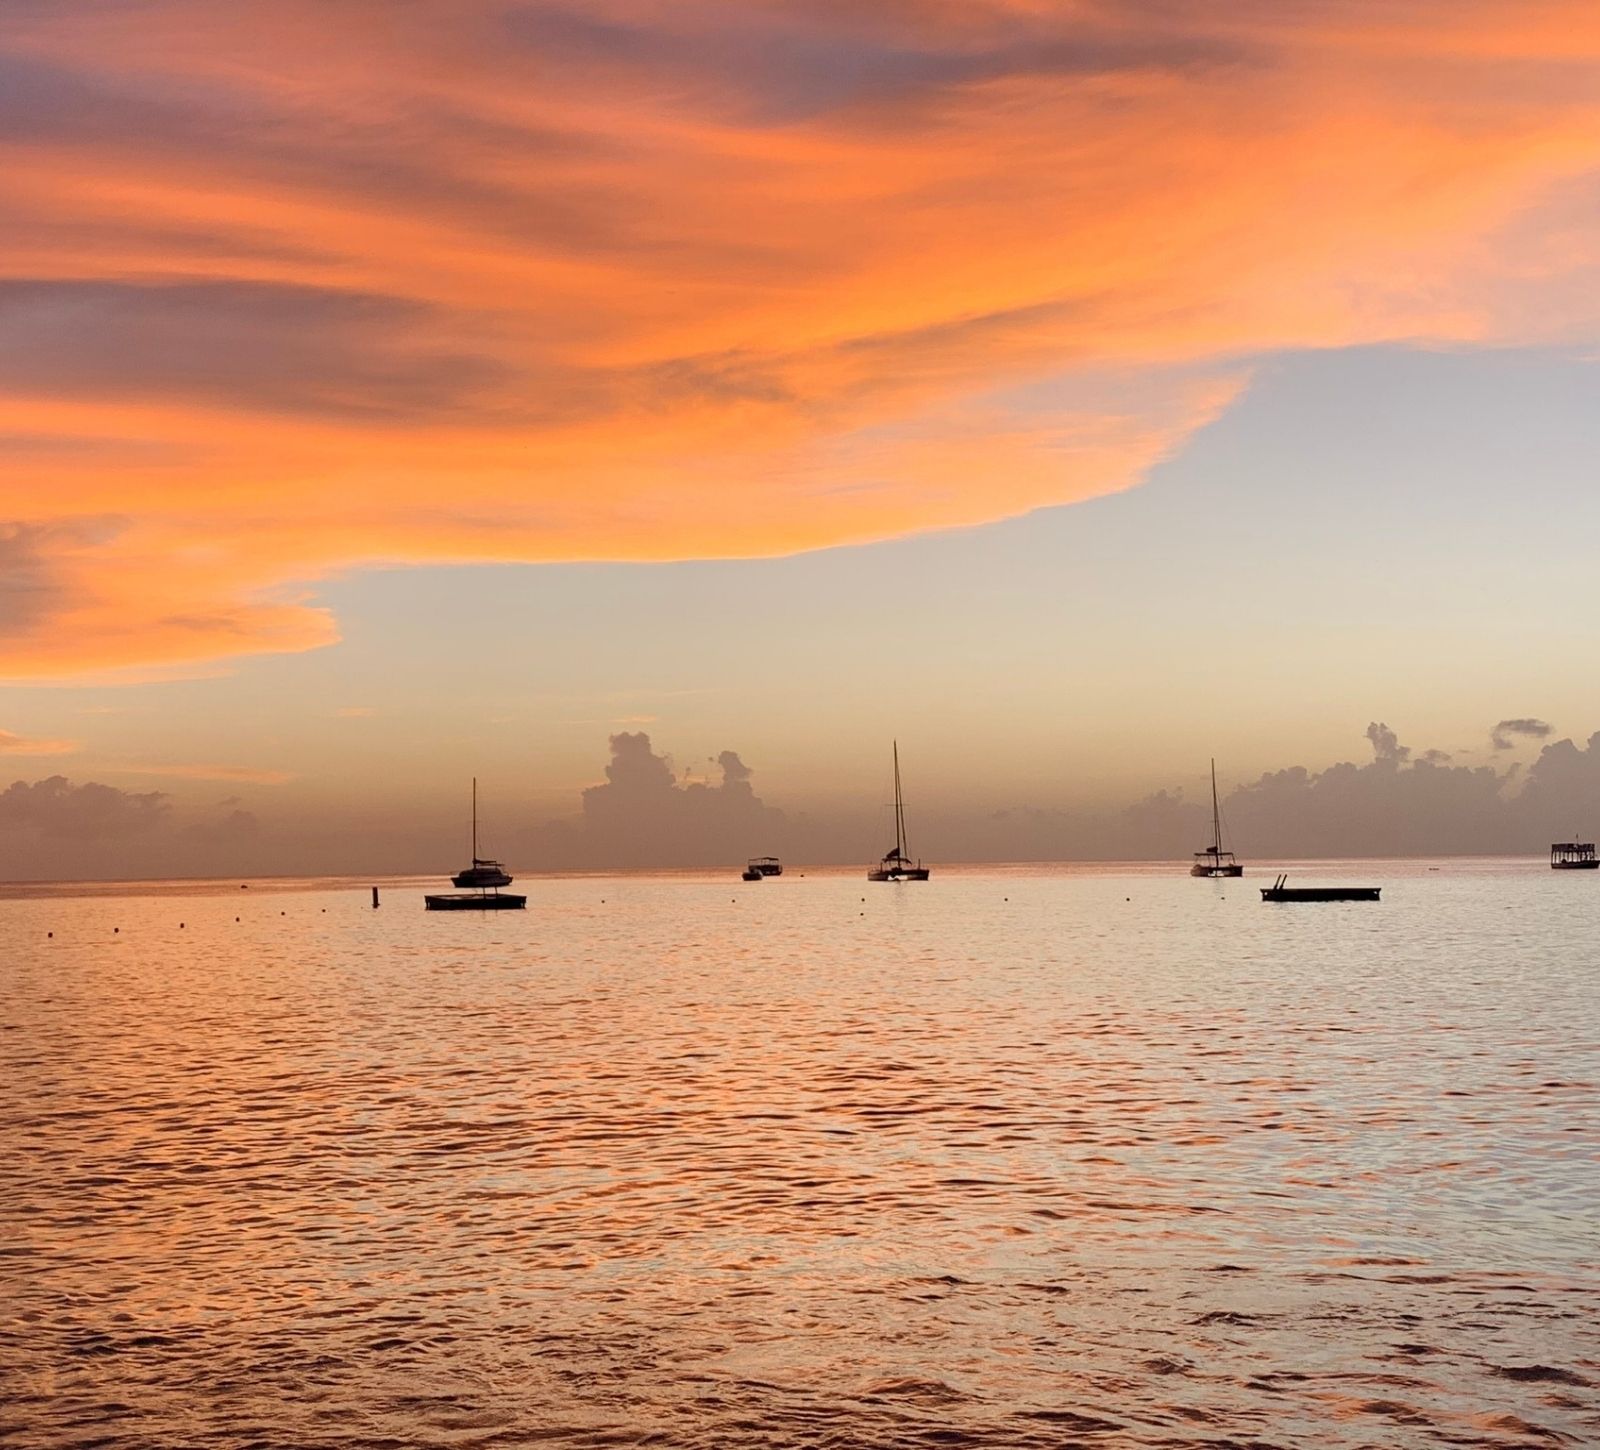 Barbados vacation picture with sunset with sailboats and ocean